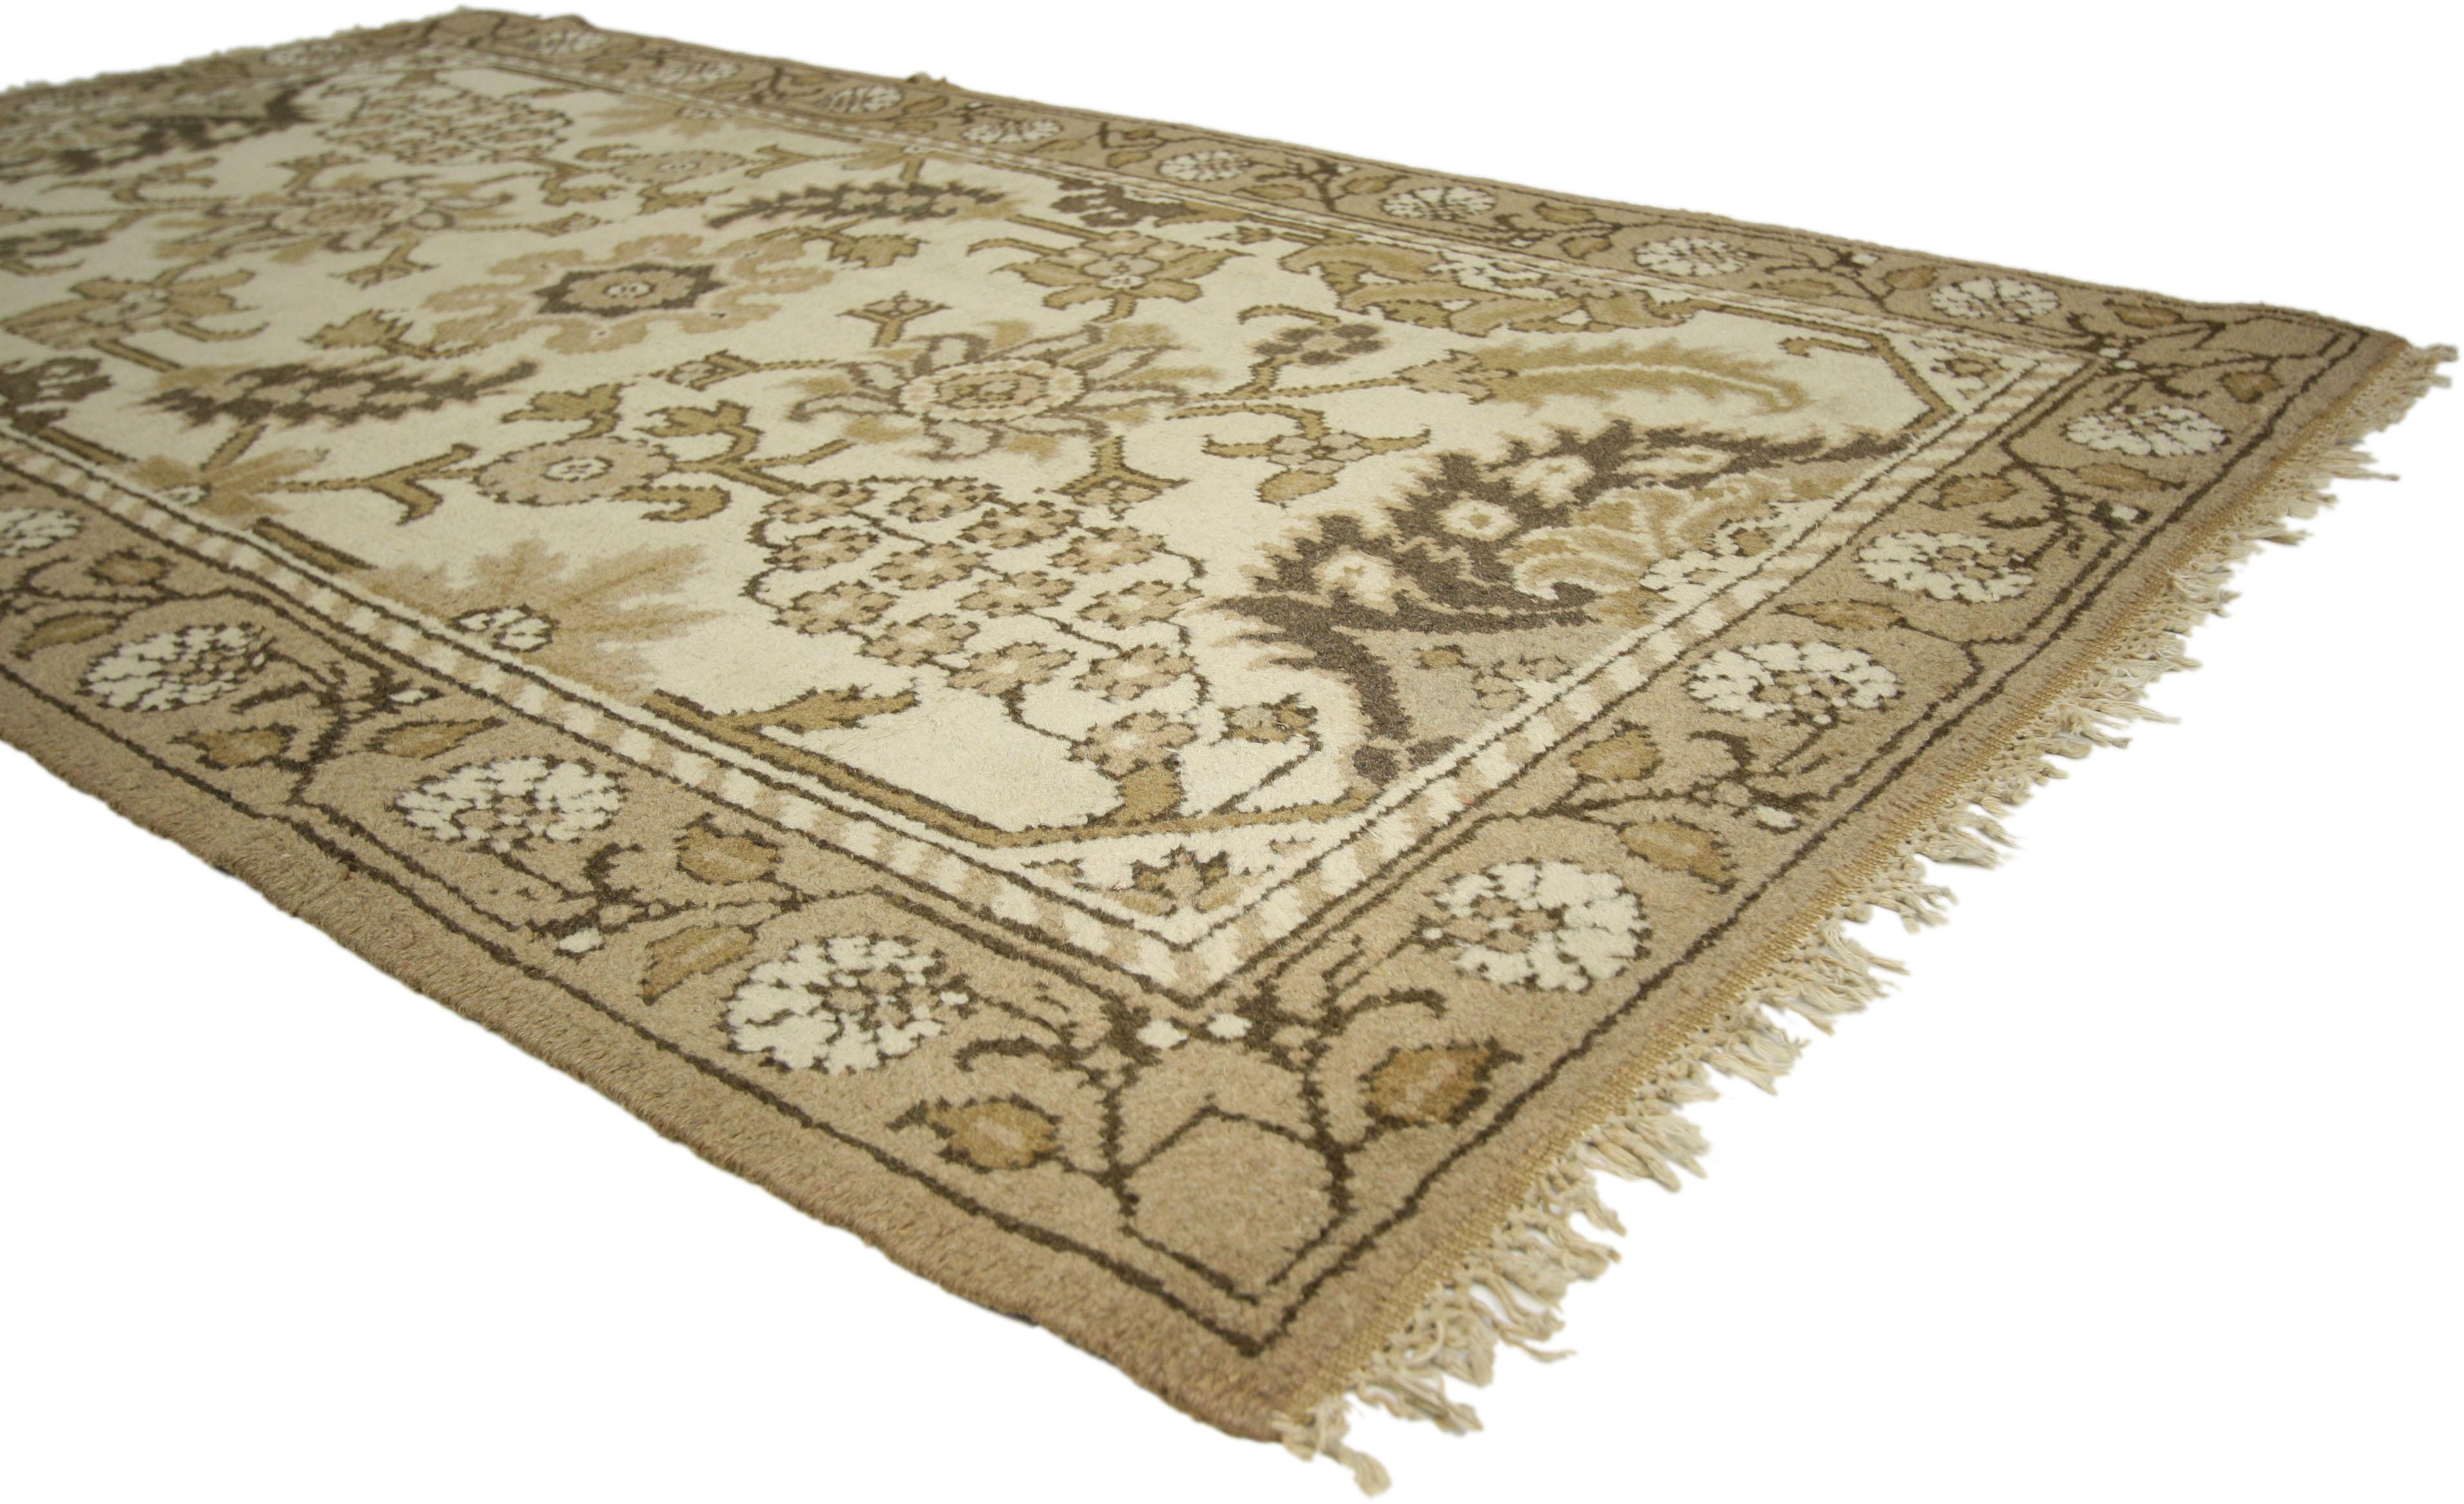 71889 Distressed Antique Indian Agra Rug with Modern Rustic Shaker Style 04'00 x 06'08.​​ Warm and inviting with the right amount of age wear, this hand knotted wool antique Indian Agra accent rug features a large-scale geometric pattern composed of